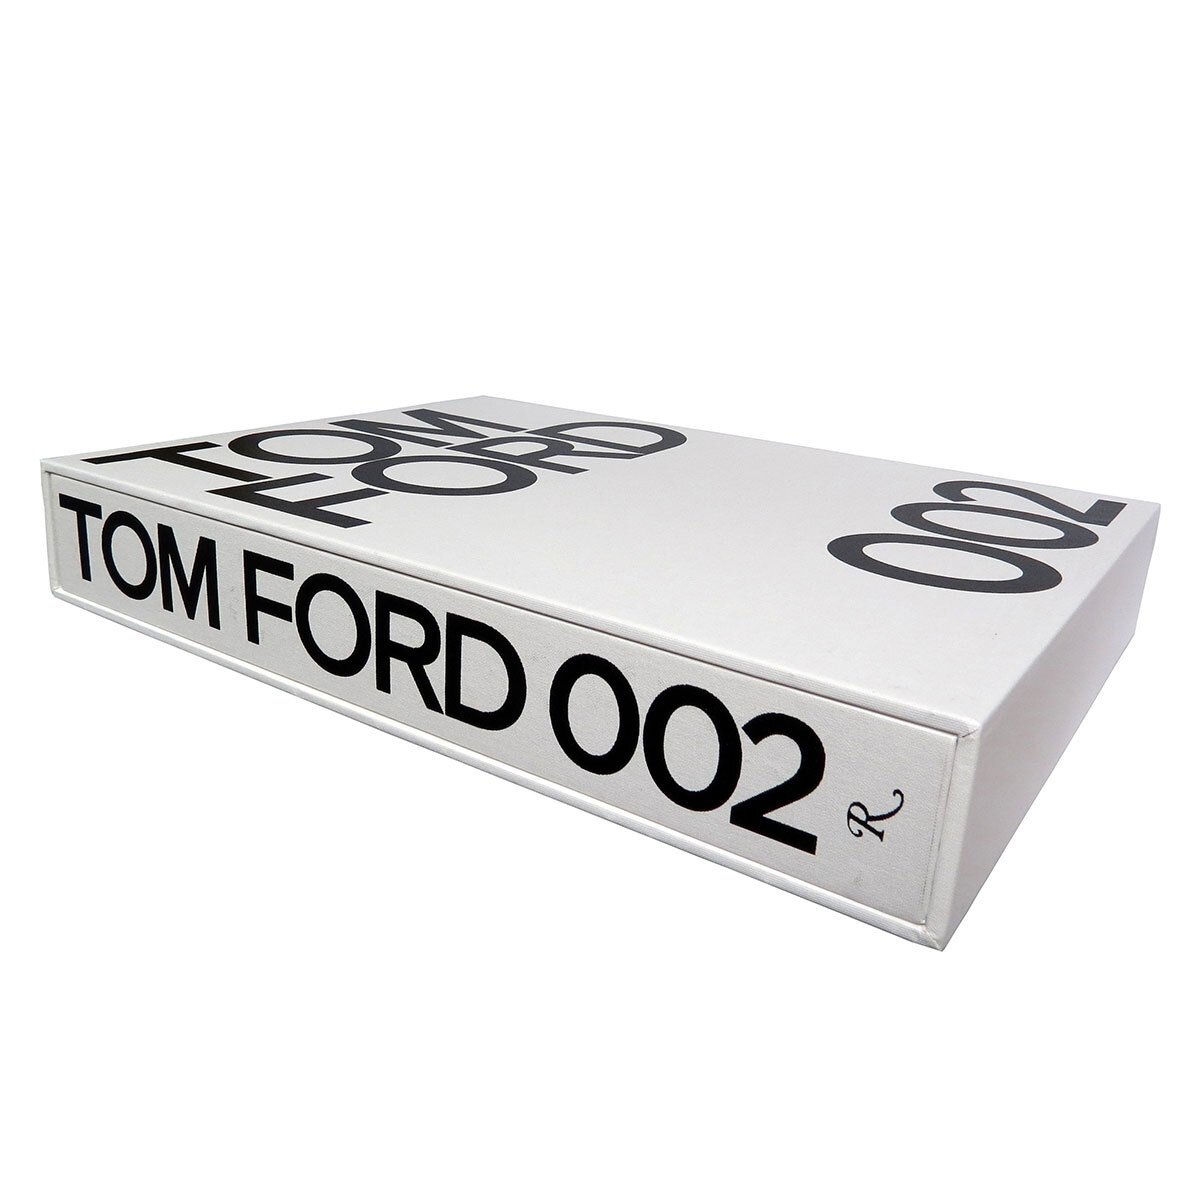 Arriba 48+ imagen tom ford 002 review - Abzlocal.mx